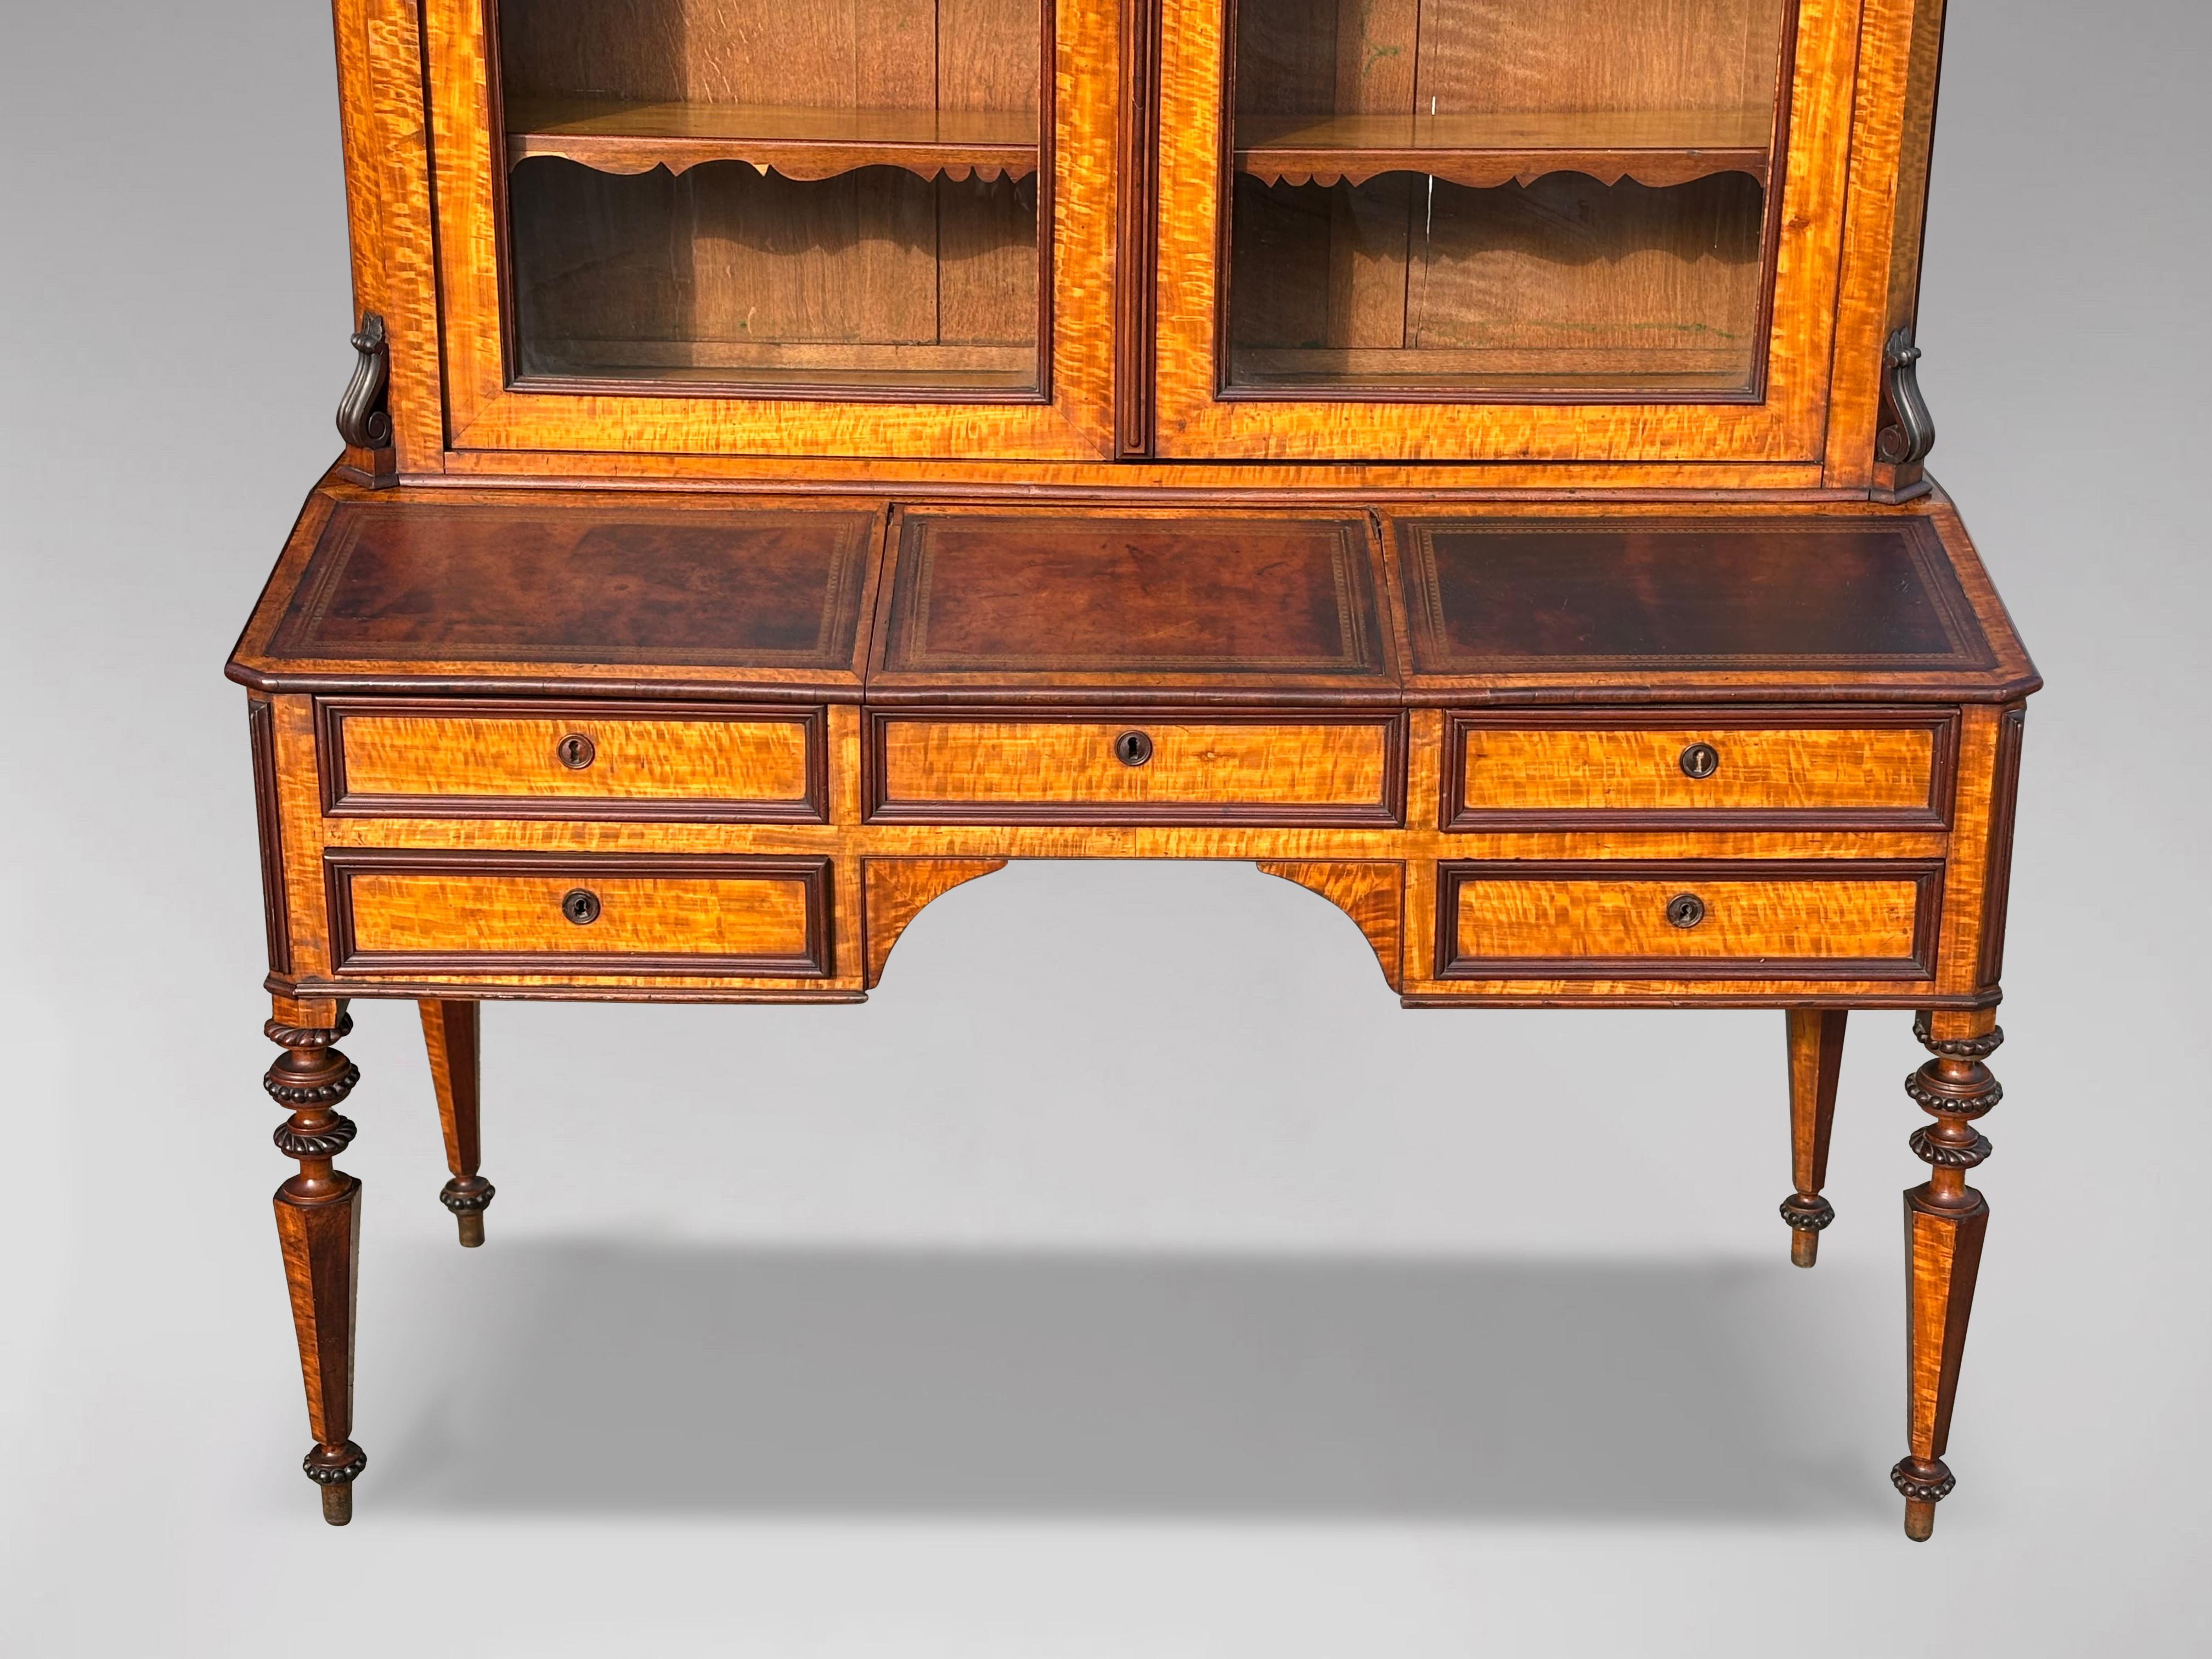 Fine 19th Century French Louis Philippe Bureau Bookcase in Maple In Good Condition For Sale In Petworth,West Sussex, GB